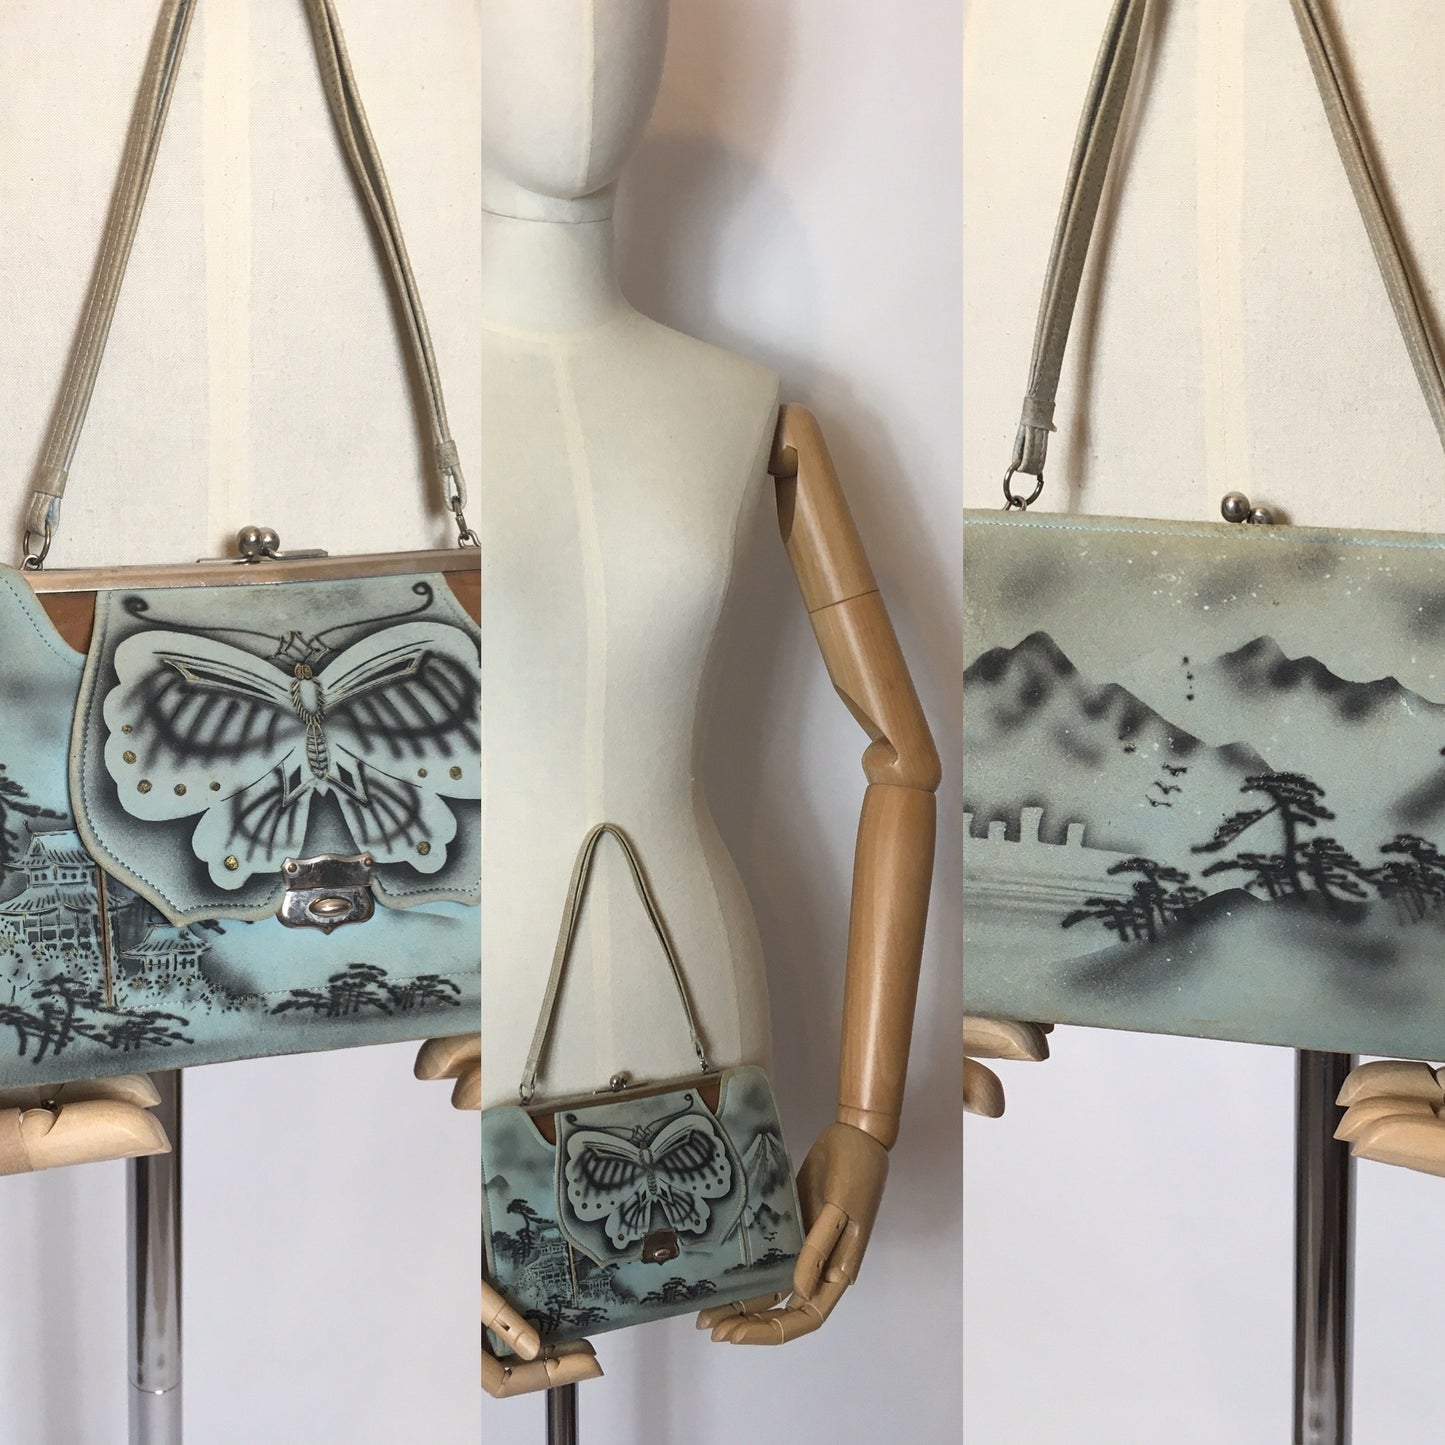 Original 1930’s Powder Blue Tourist Bag with images of Mountains and Temples  - Festival of Vintage Fashion Show Exclusive